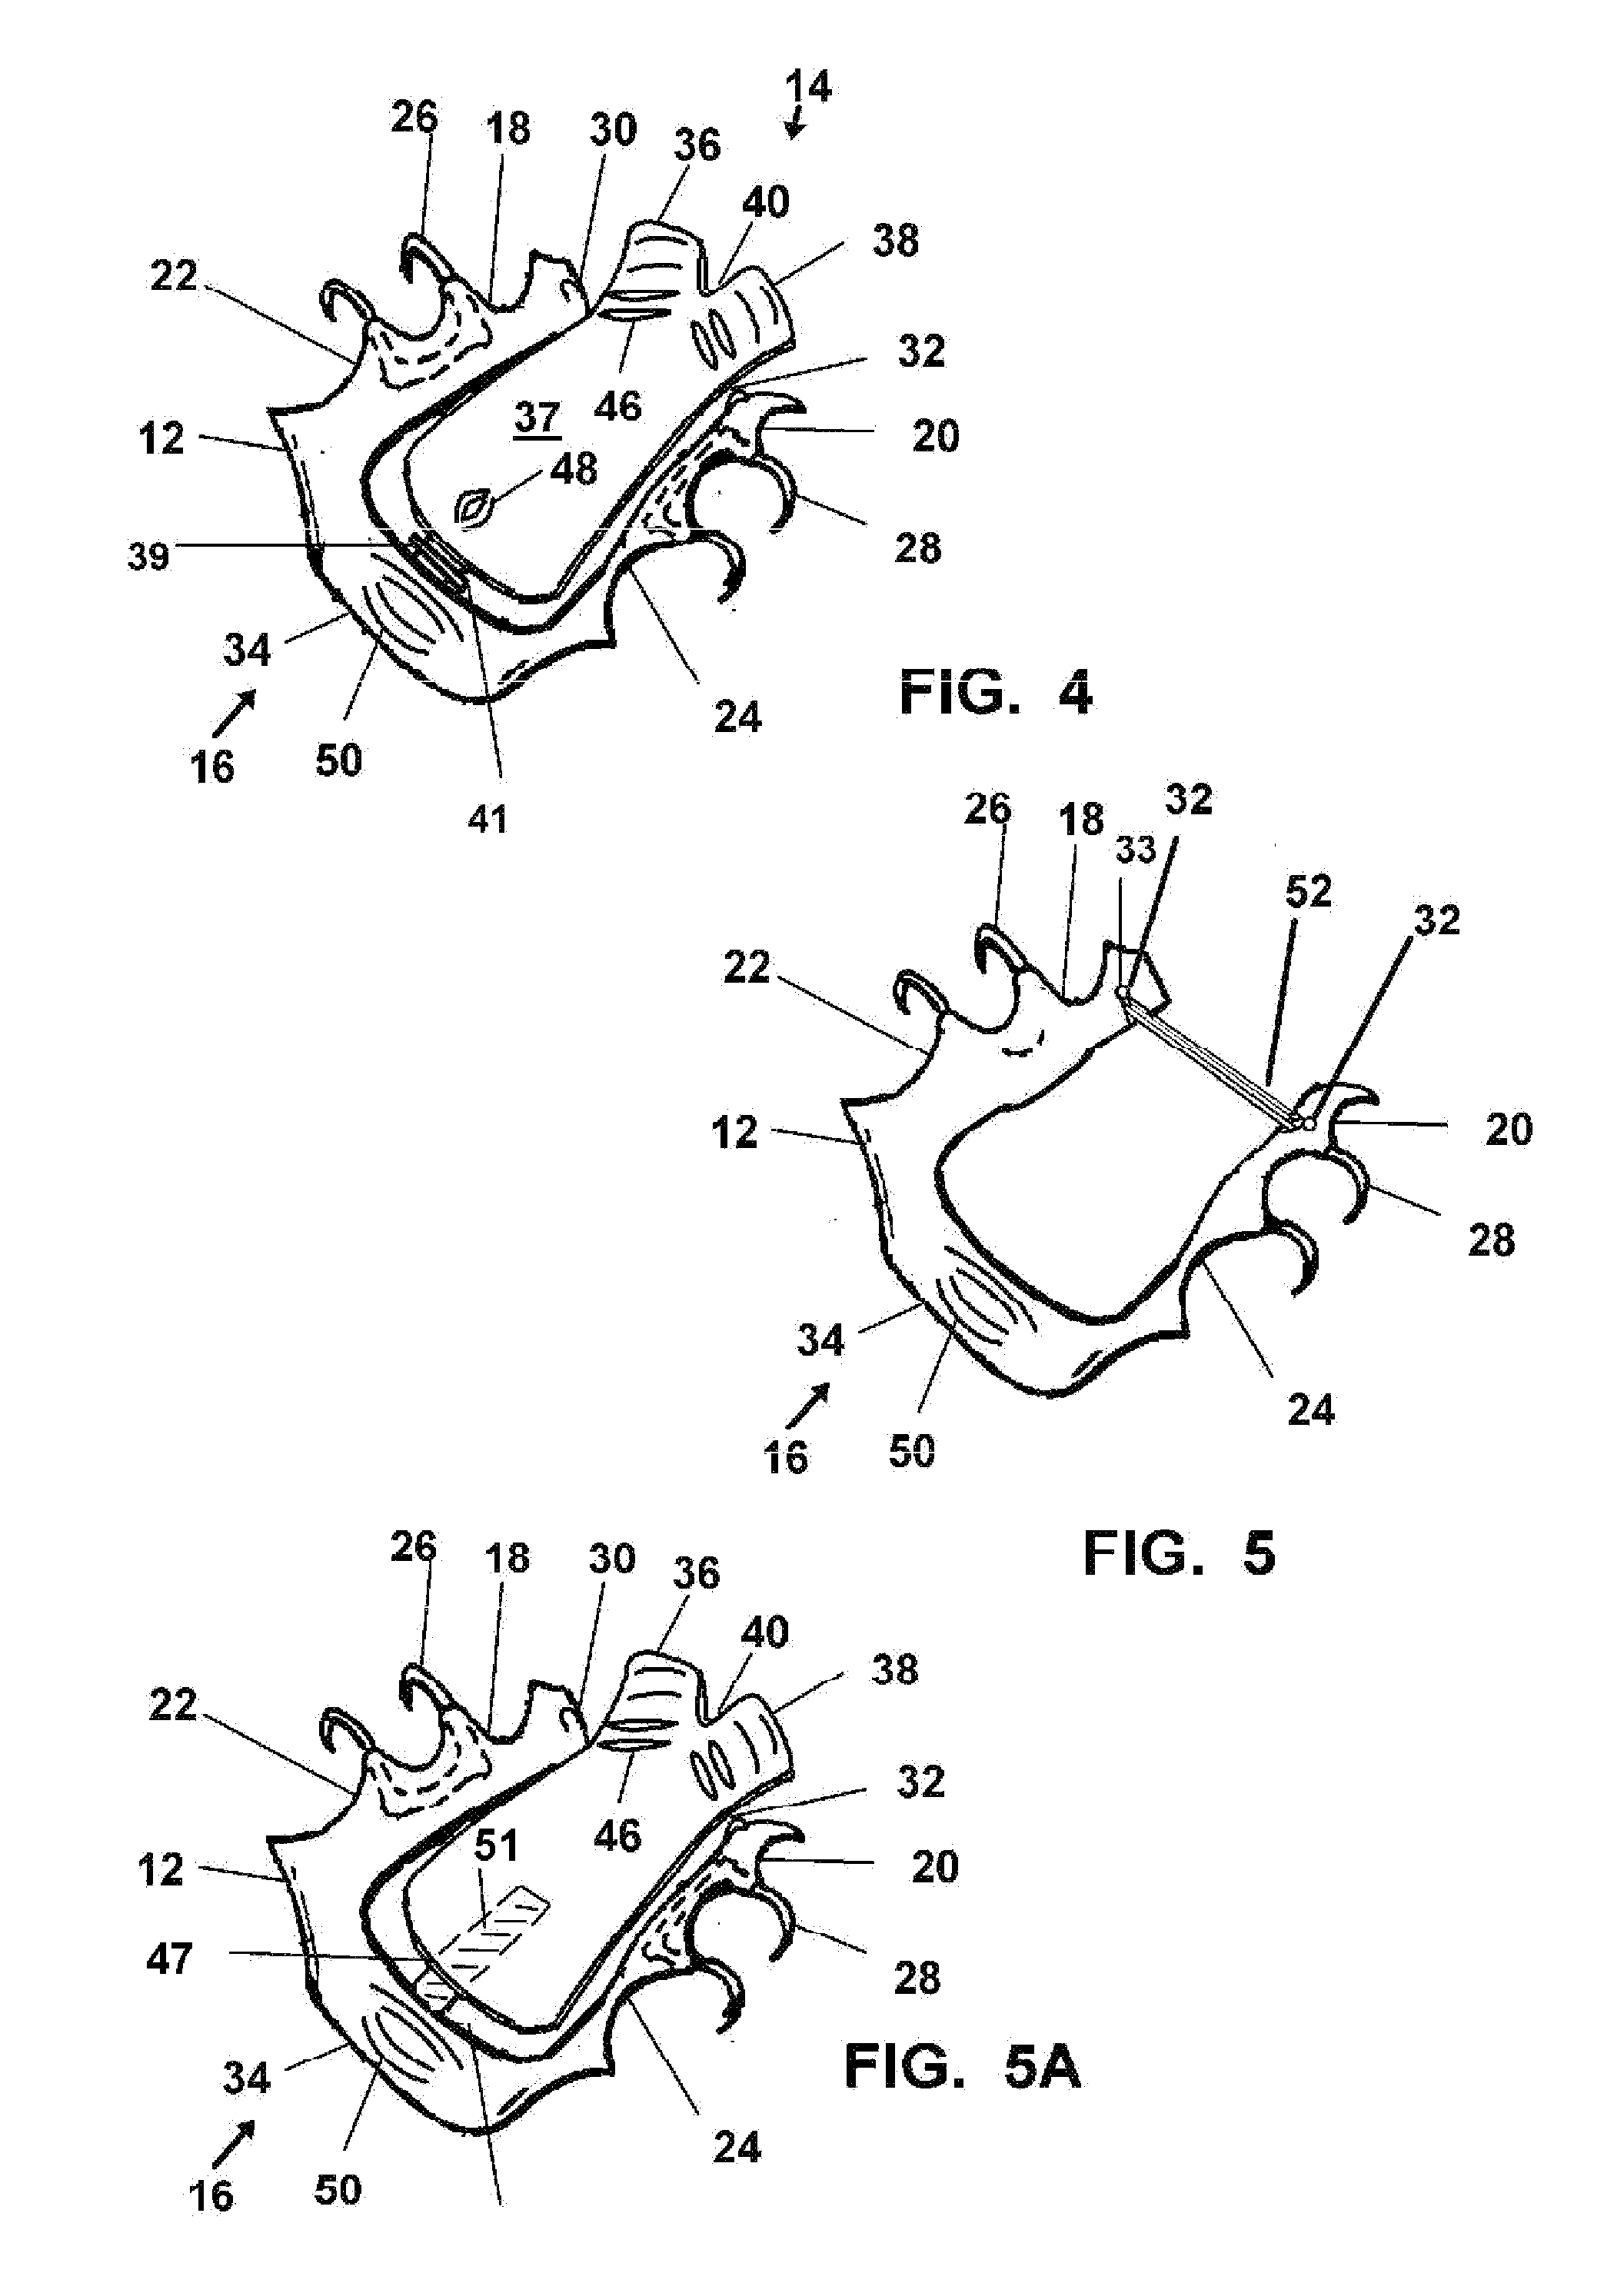 Oral Exercise Appliance